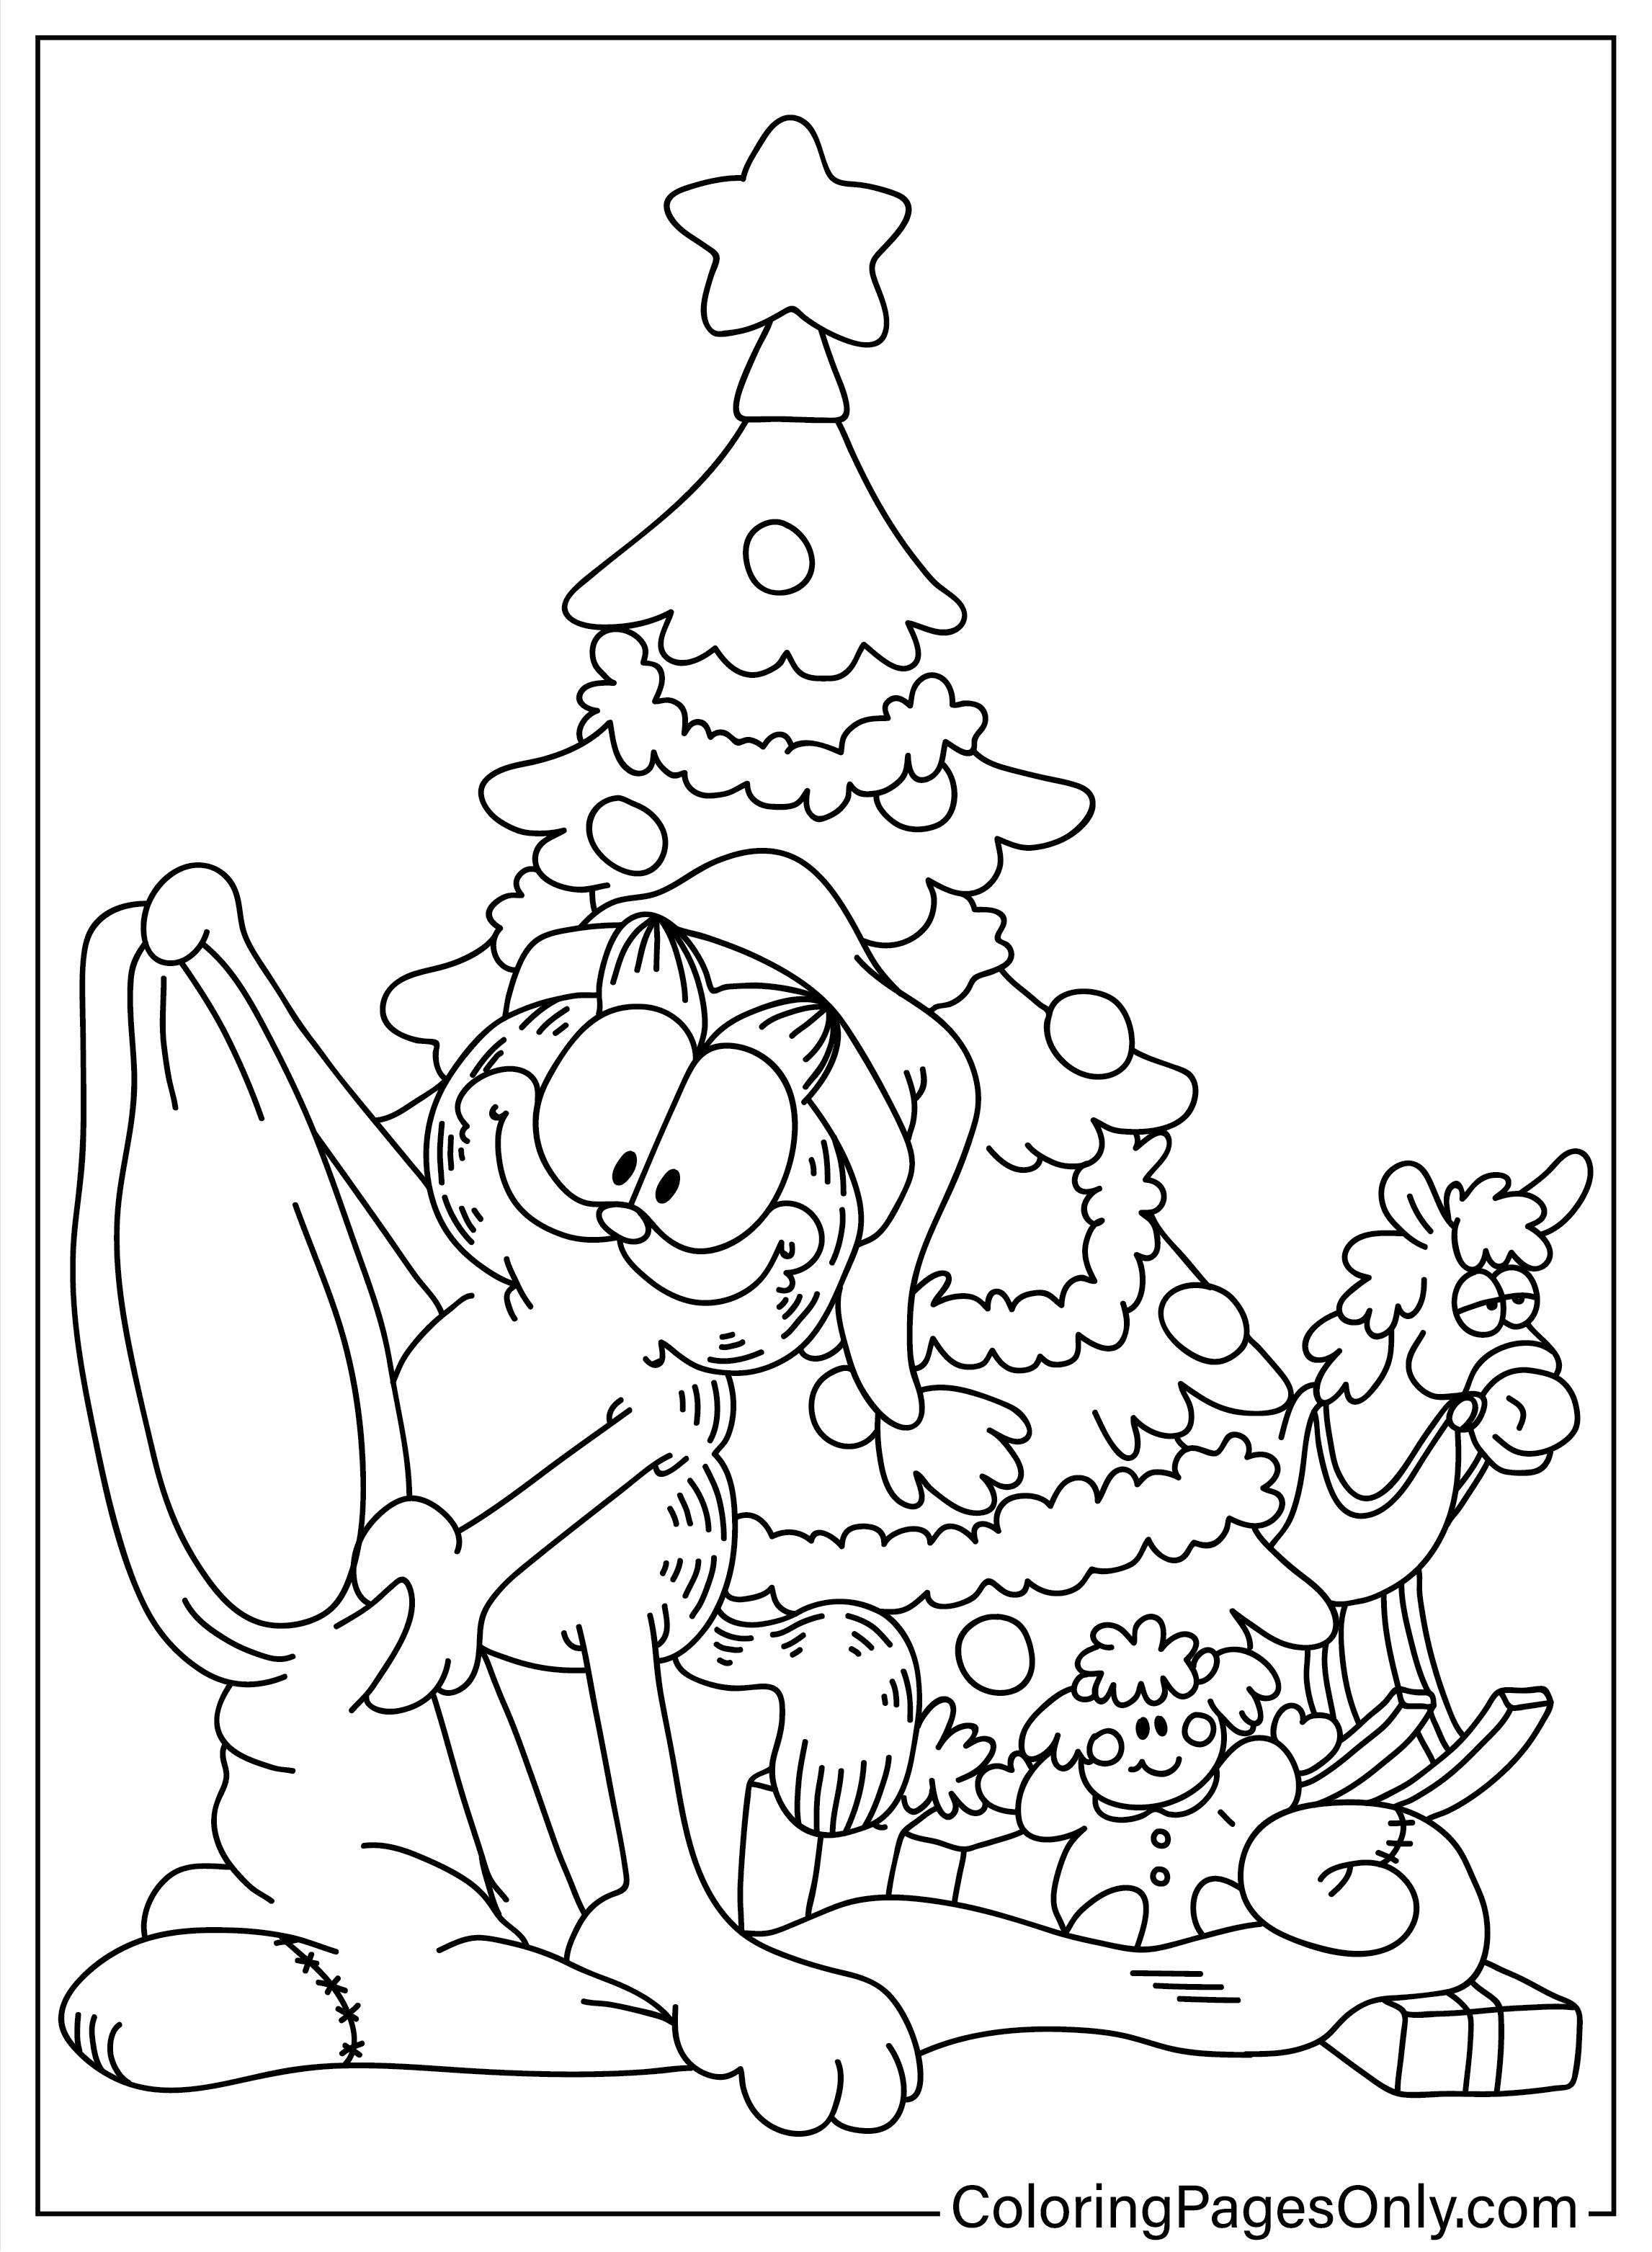 Christmas garfield coloring page